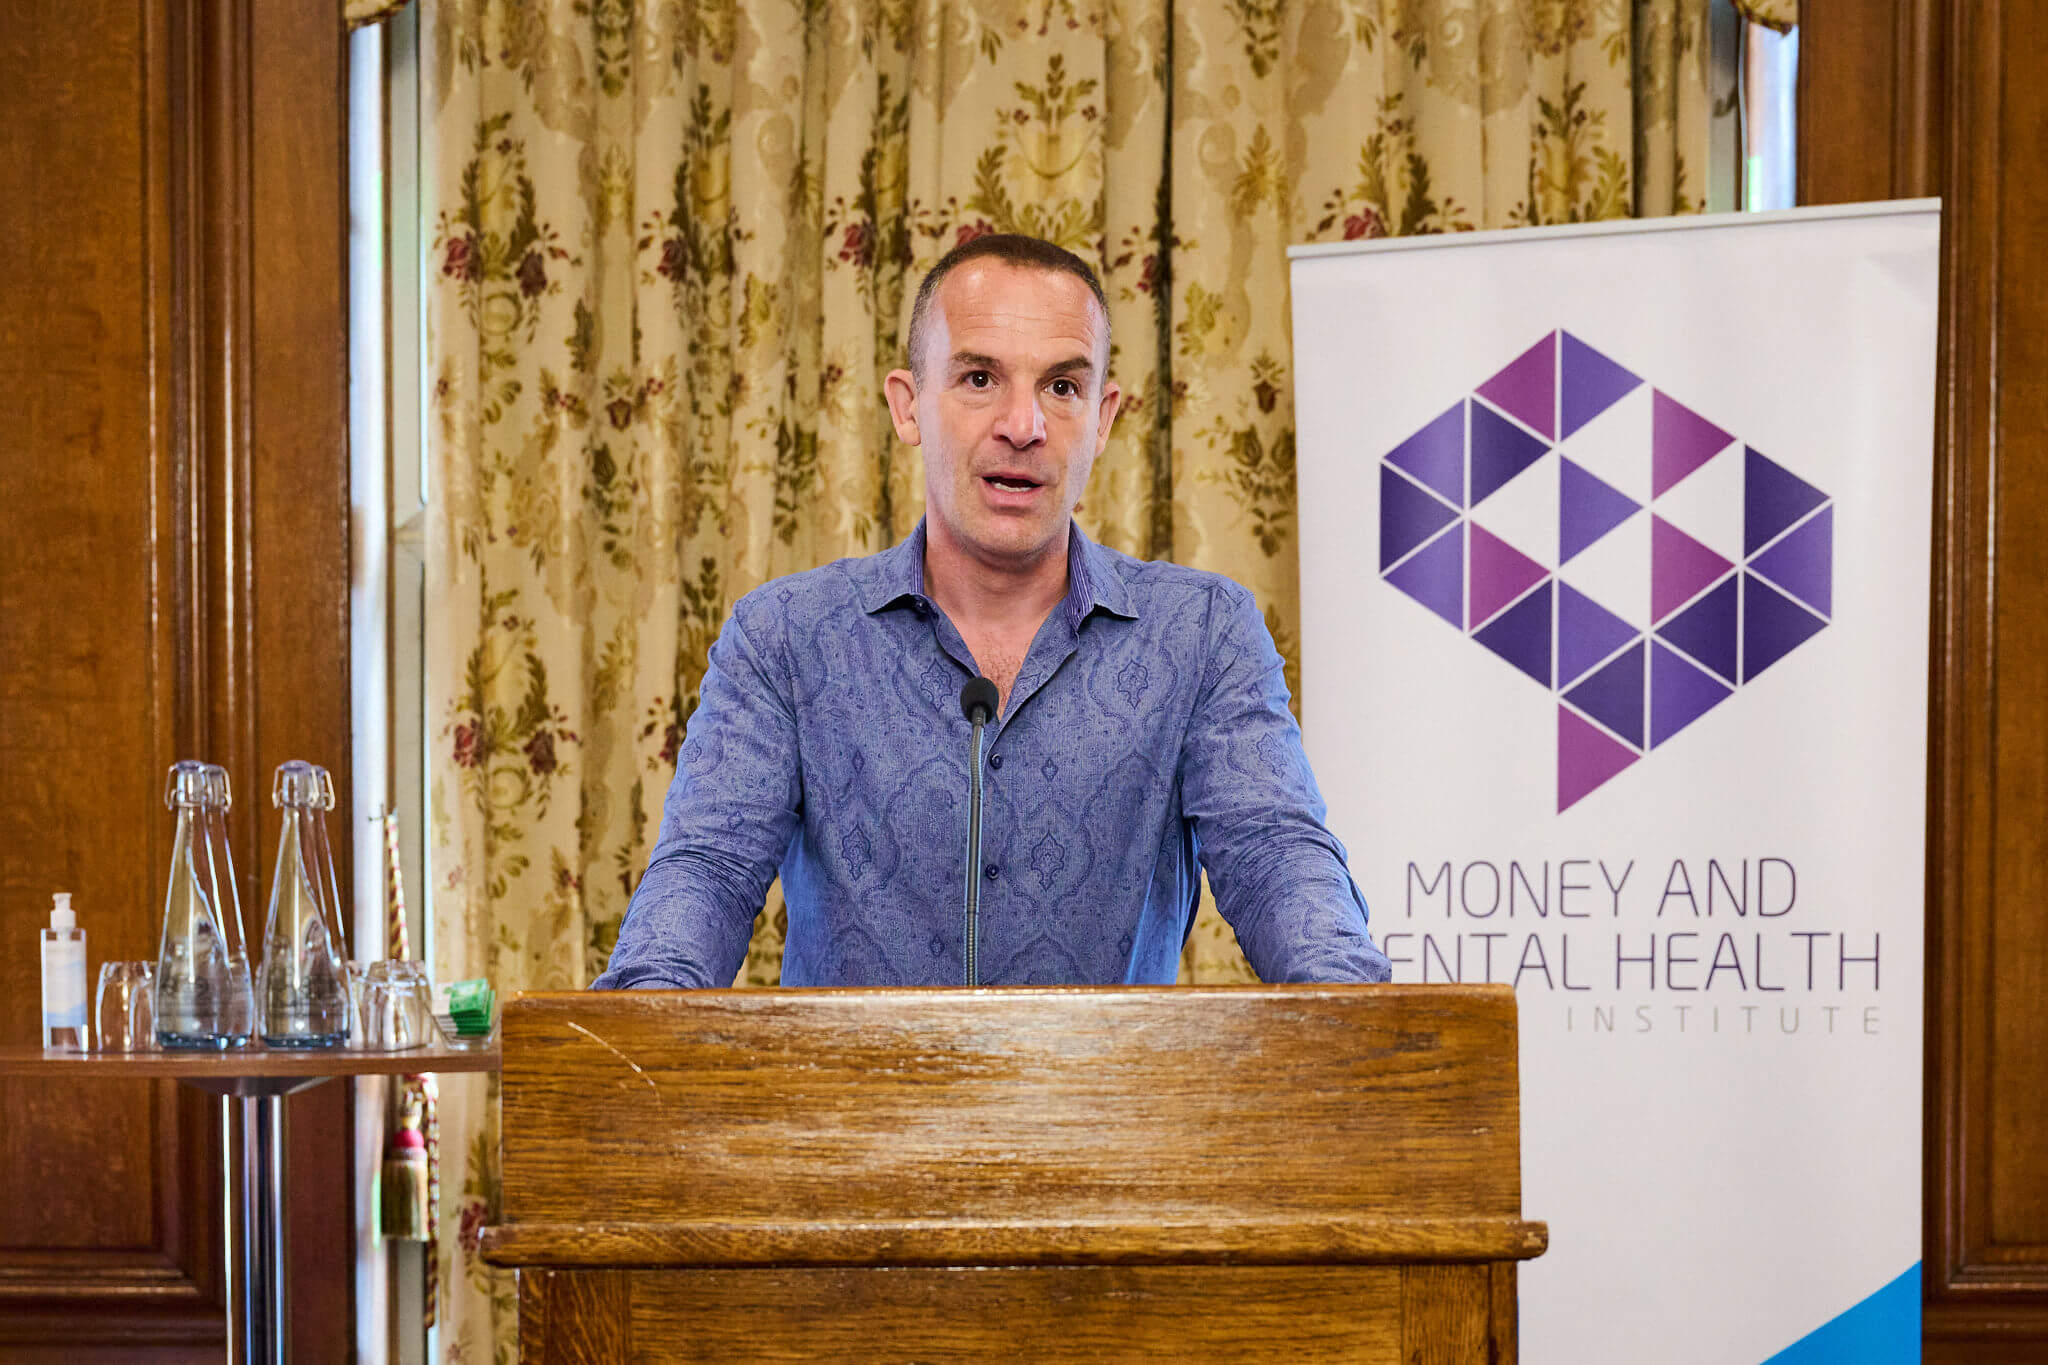 Martin Lewis CBE speaking at Money and Mental Health's Breaking the Cycle launch event - making the case for joined-up mental health and money advice services through NHS Talking Therapies.